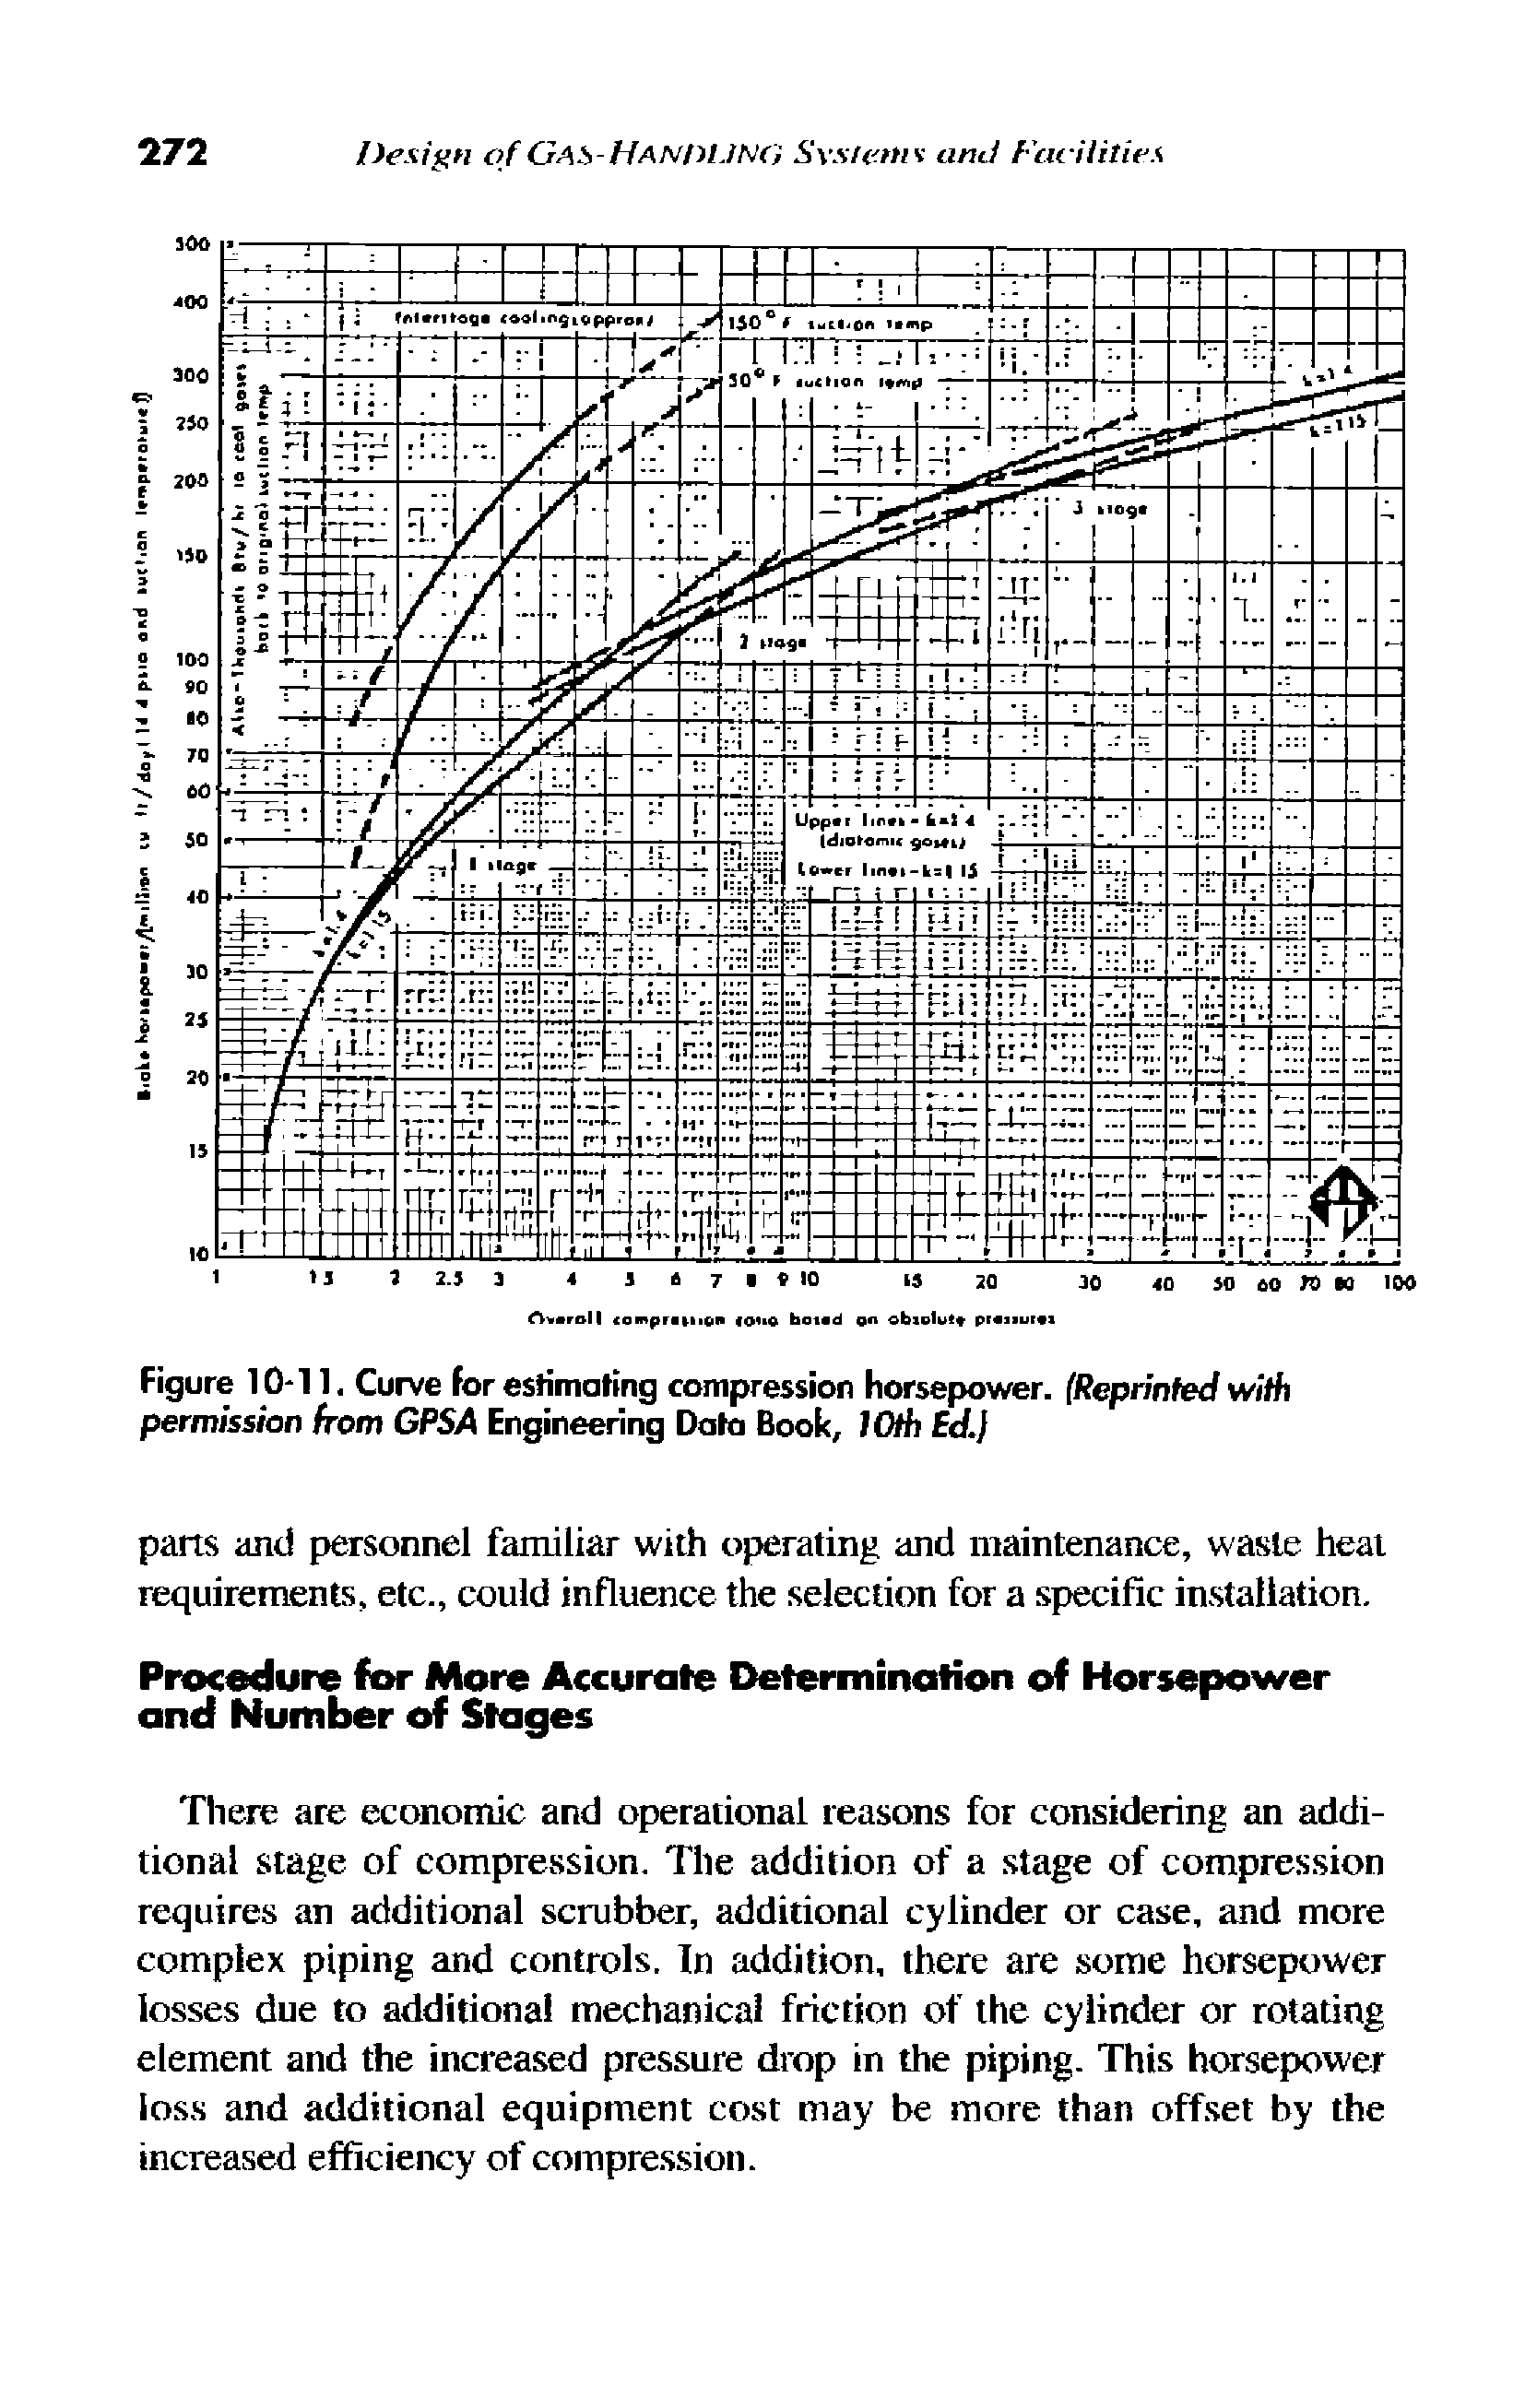 Figure 10-11. Curve for estimating compression horsepower. (Reprinted with permission from GPSA Engineering Data Book, lOtb Ed. ...